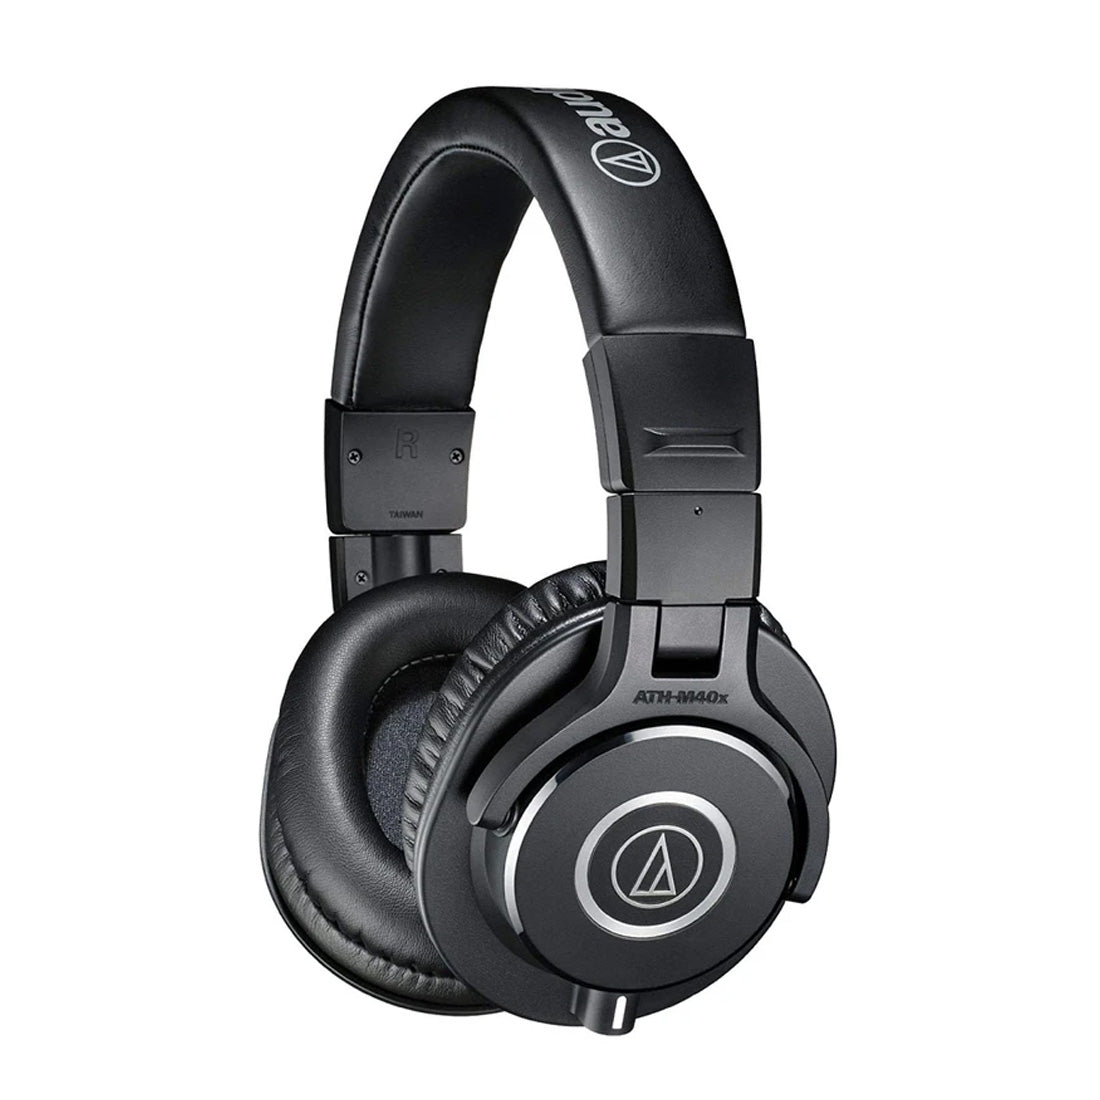 Audio-Technica ATH-M40x Over-Ear Wired Headphone with 40mm Neodymium Driver